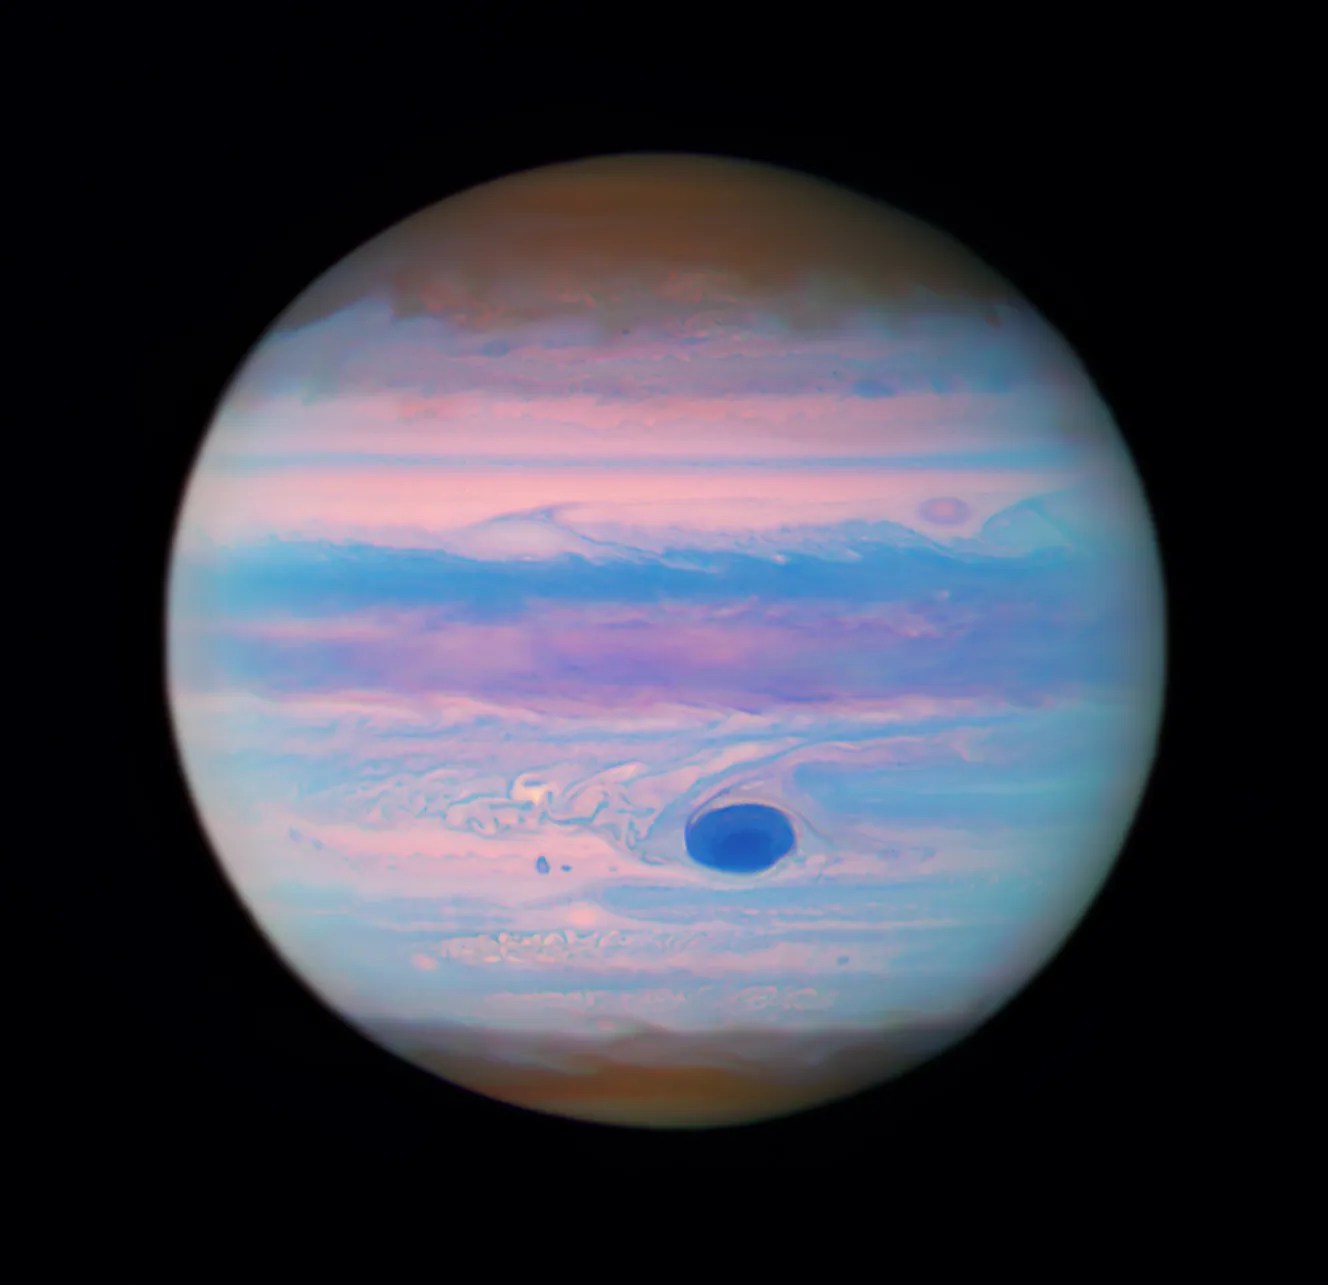 Jupiter looks iridescent in this ultraviolet image from the Hubble Space Telescope. The poles are a muted orange color, while swirls and stripes of pink, orange, blue, and purple cover the rest of the planet. Jupiter's "Great Red Spot" appears a deep blue here.